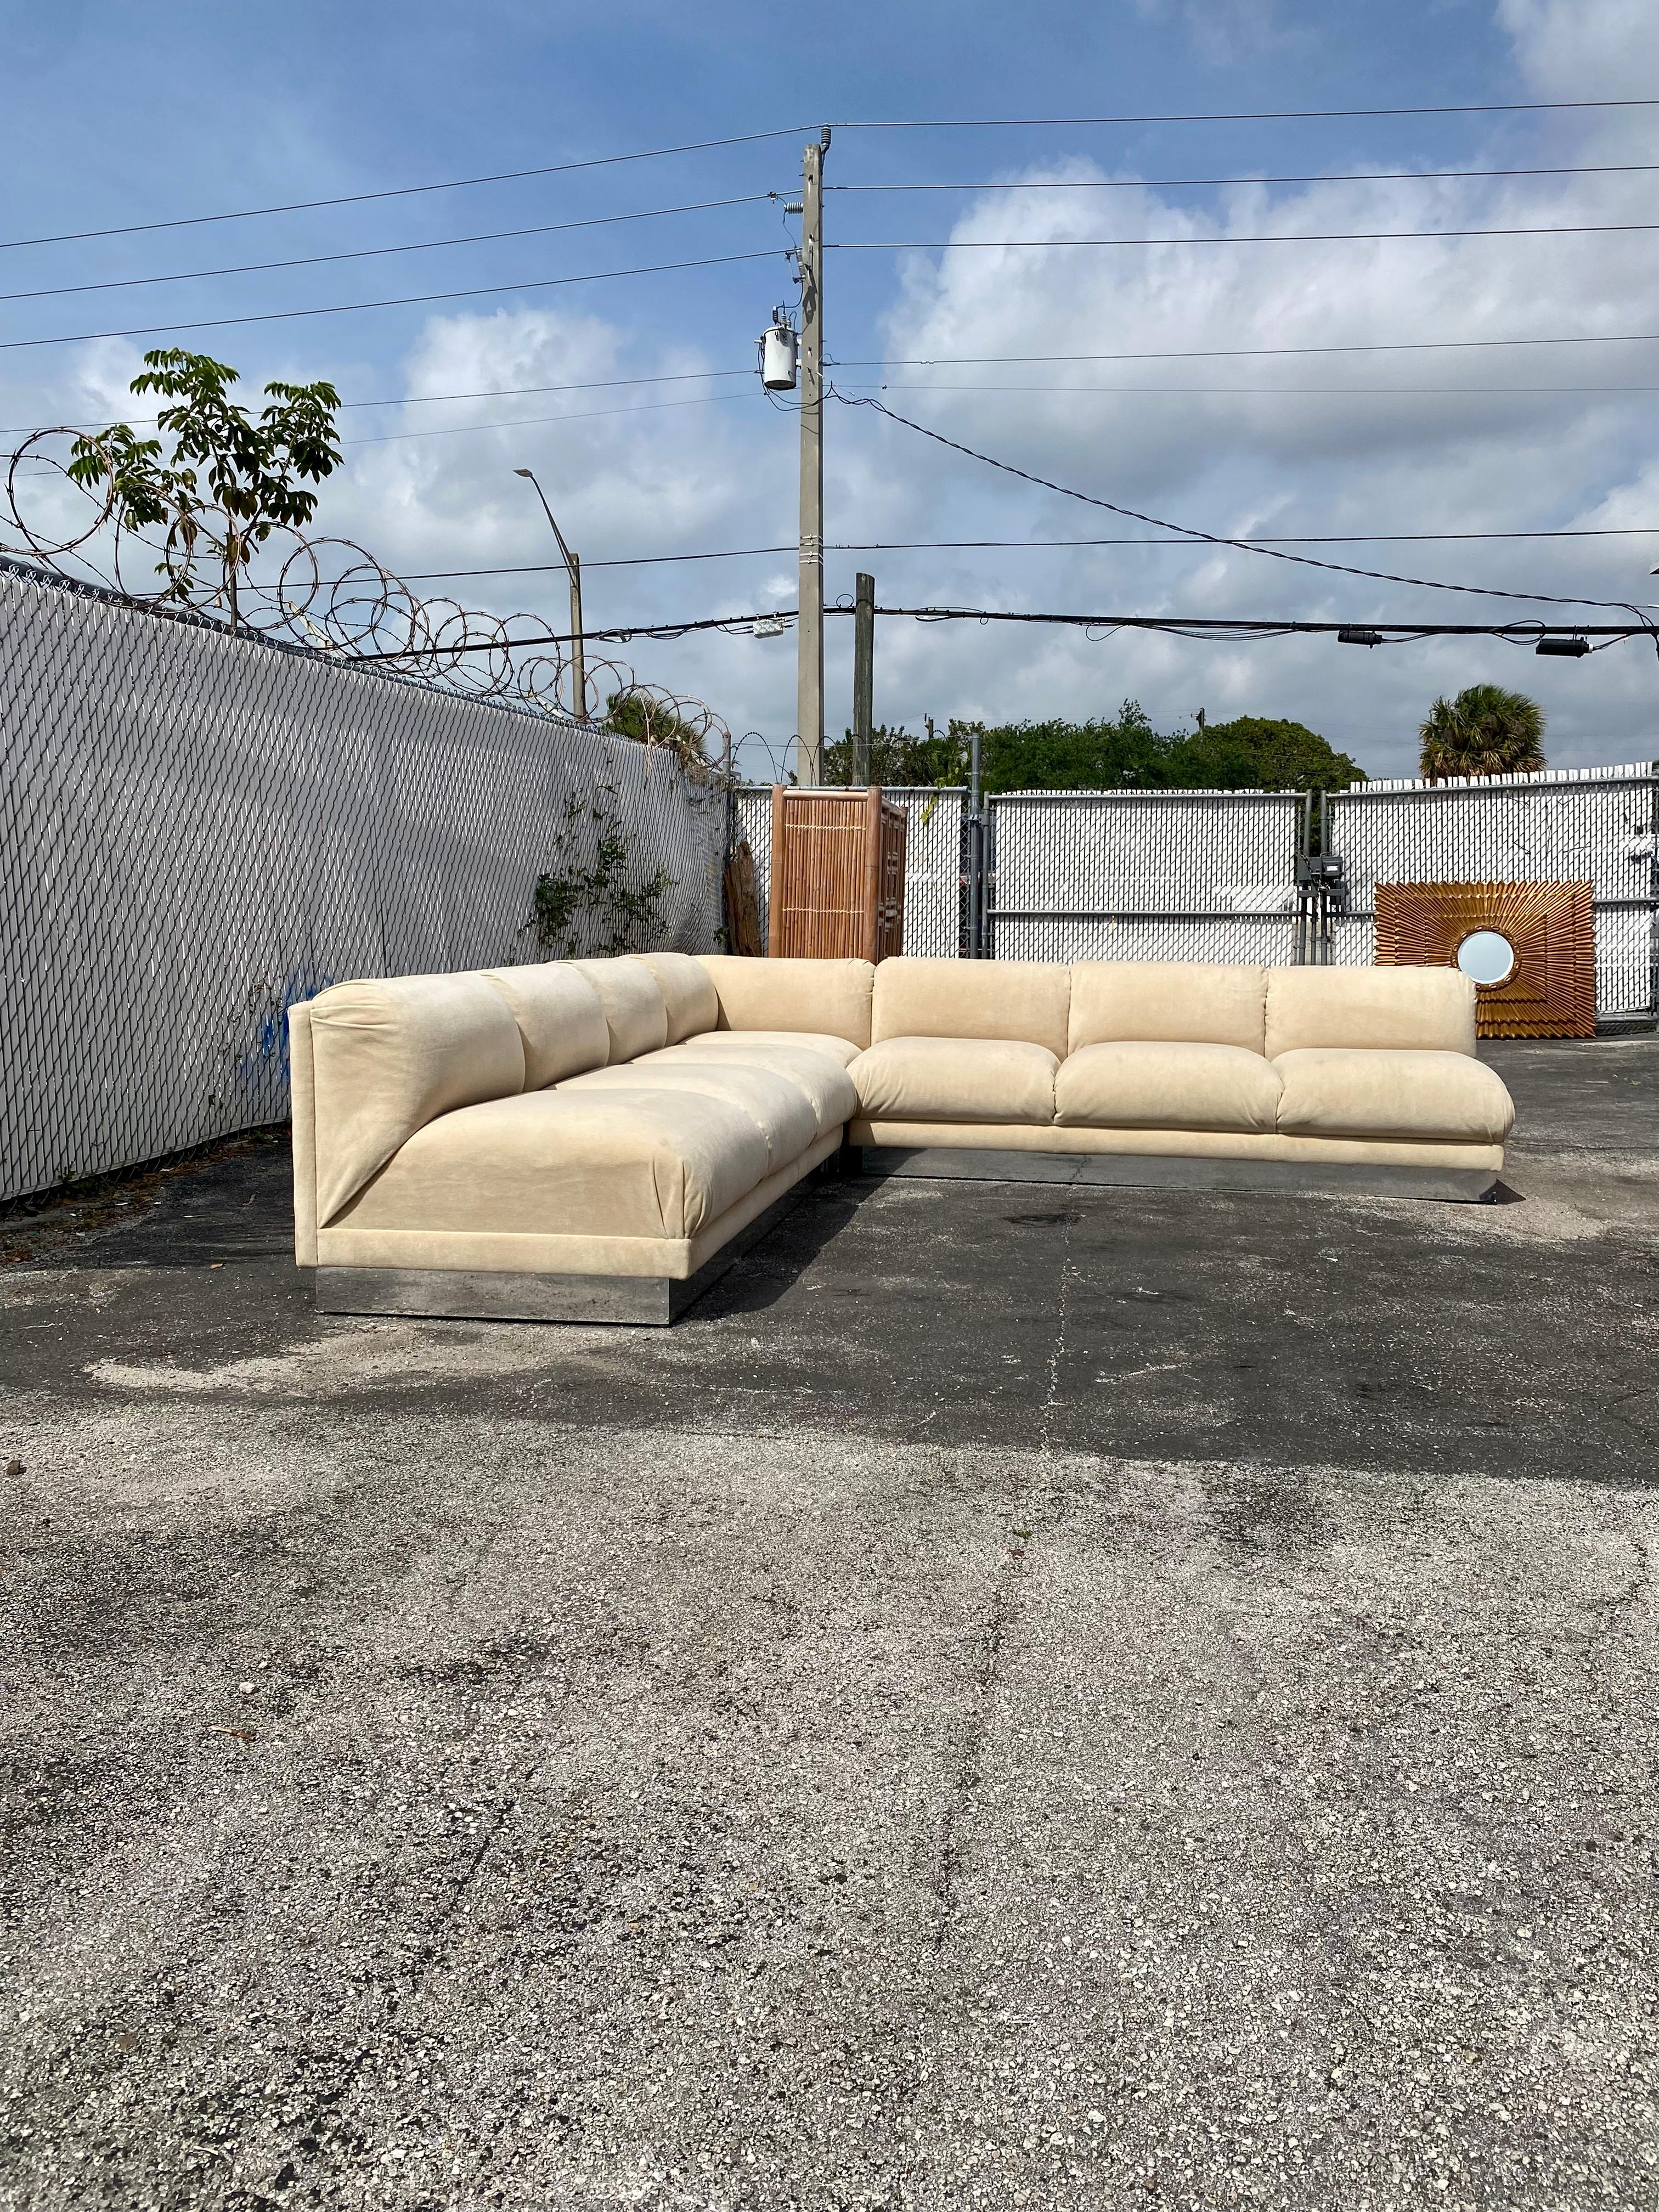 On offer on this occasion is one of the most stunning, sectional you could hope to find. Outstanding design is exhibited throughout. The beautiful cotton velvet upholstery sectional is statement piece which is also extremely comfortable and packed